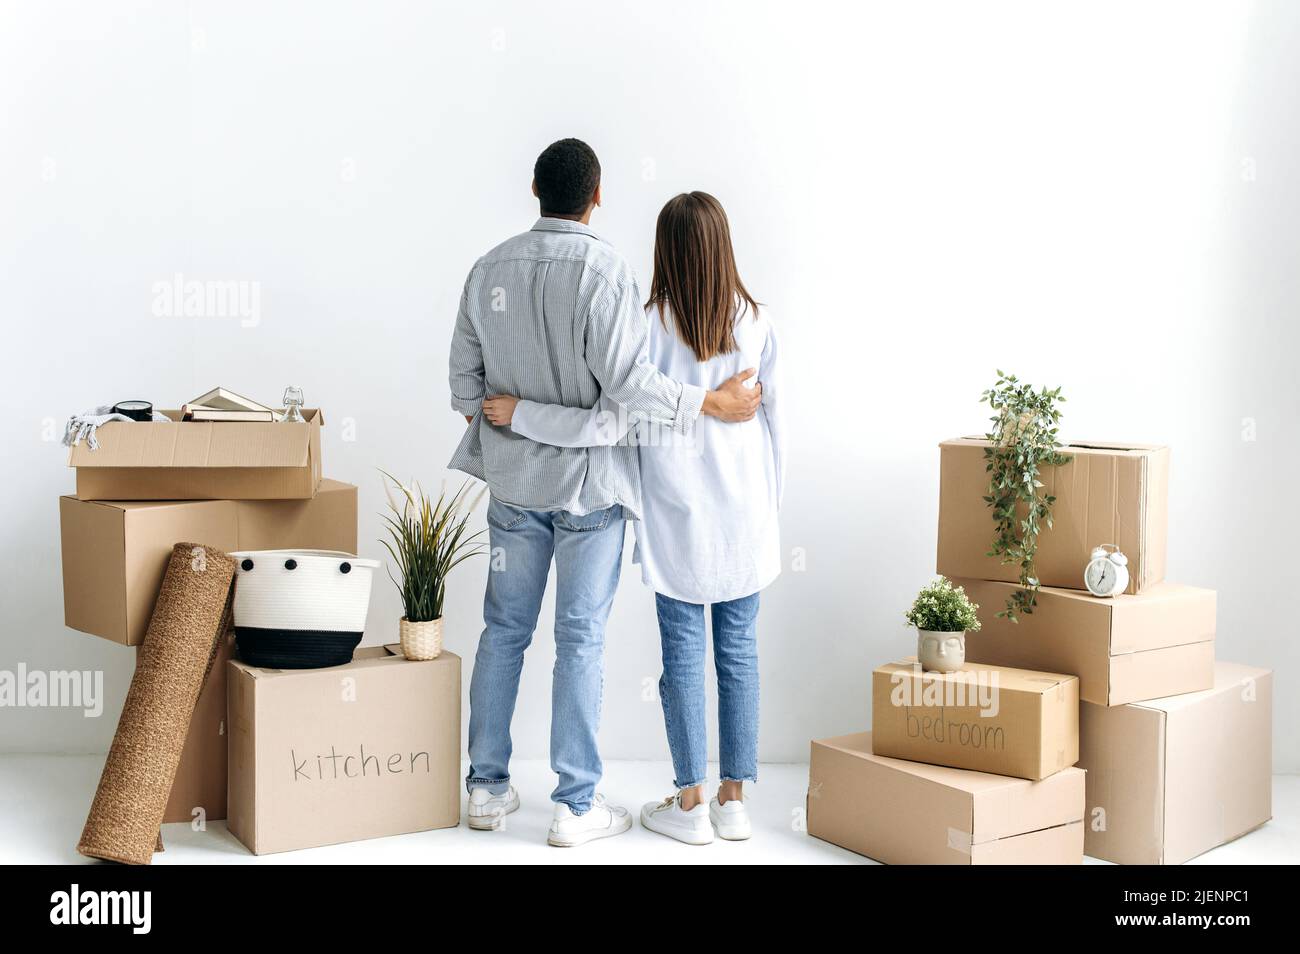 New housing, relocation. Happy young multiracial couple, are standing with their backs to the camera between boxes of stuff in their new home or rental apartment, planning their house future design Stock Photo